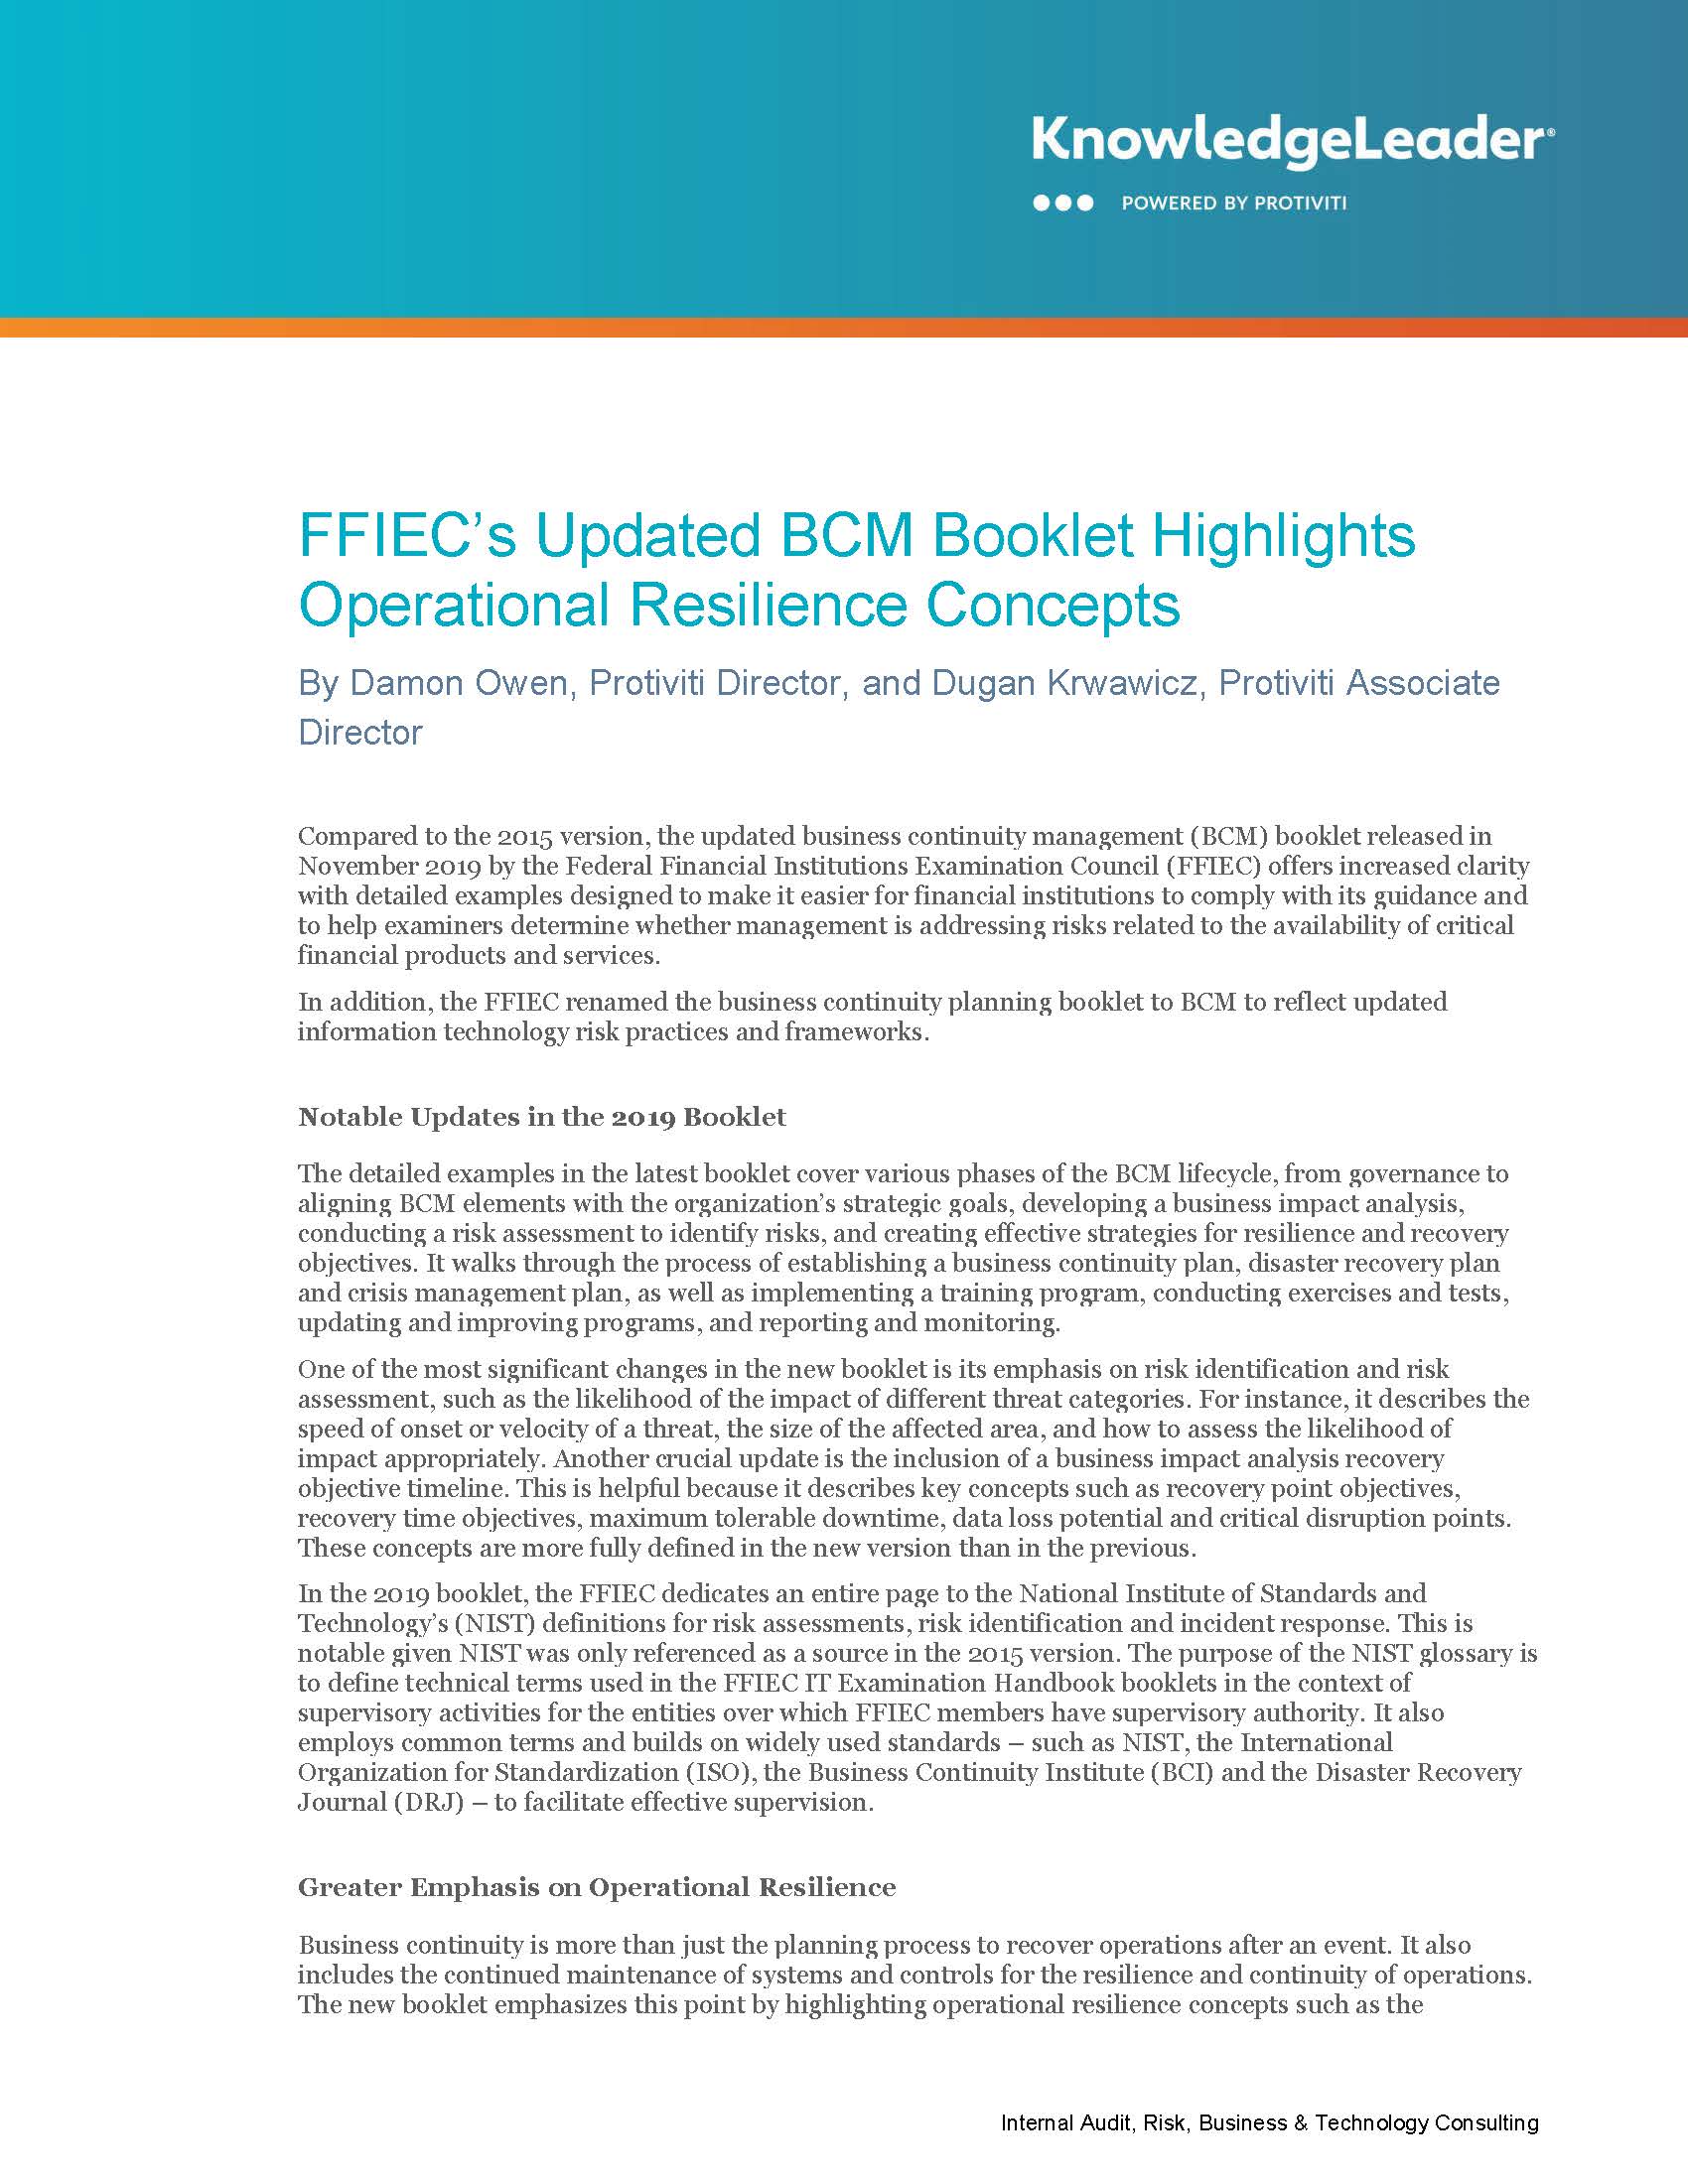 Screenshot of the first page of FFIEC’s Updated BCM Booklet Highlights Operational Resilience Concepts